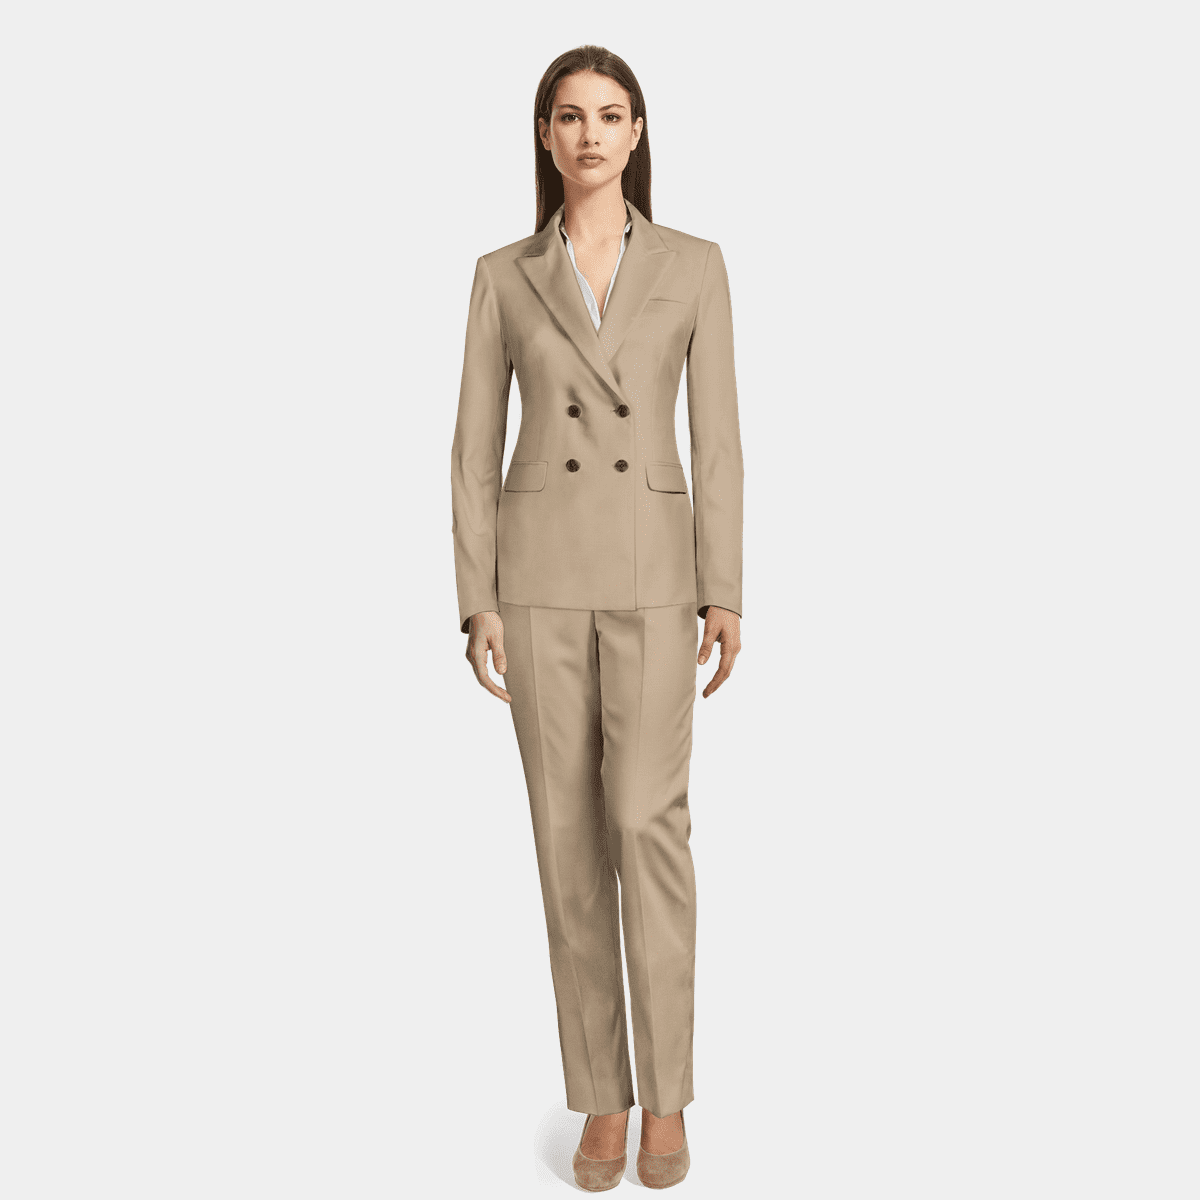 Dark Beige double breasted Pant Suit